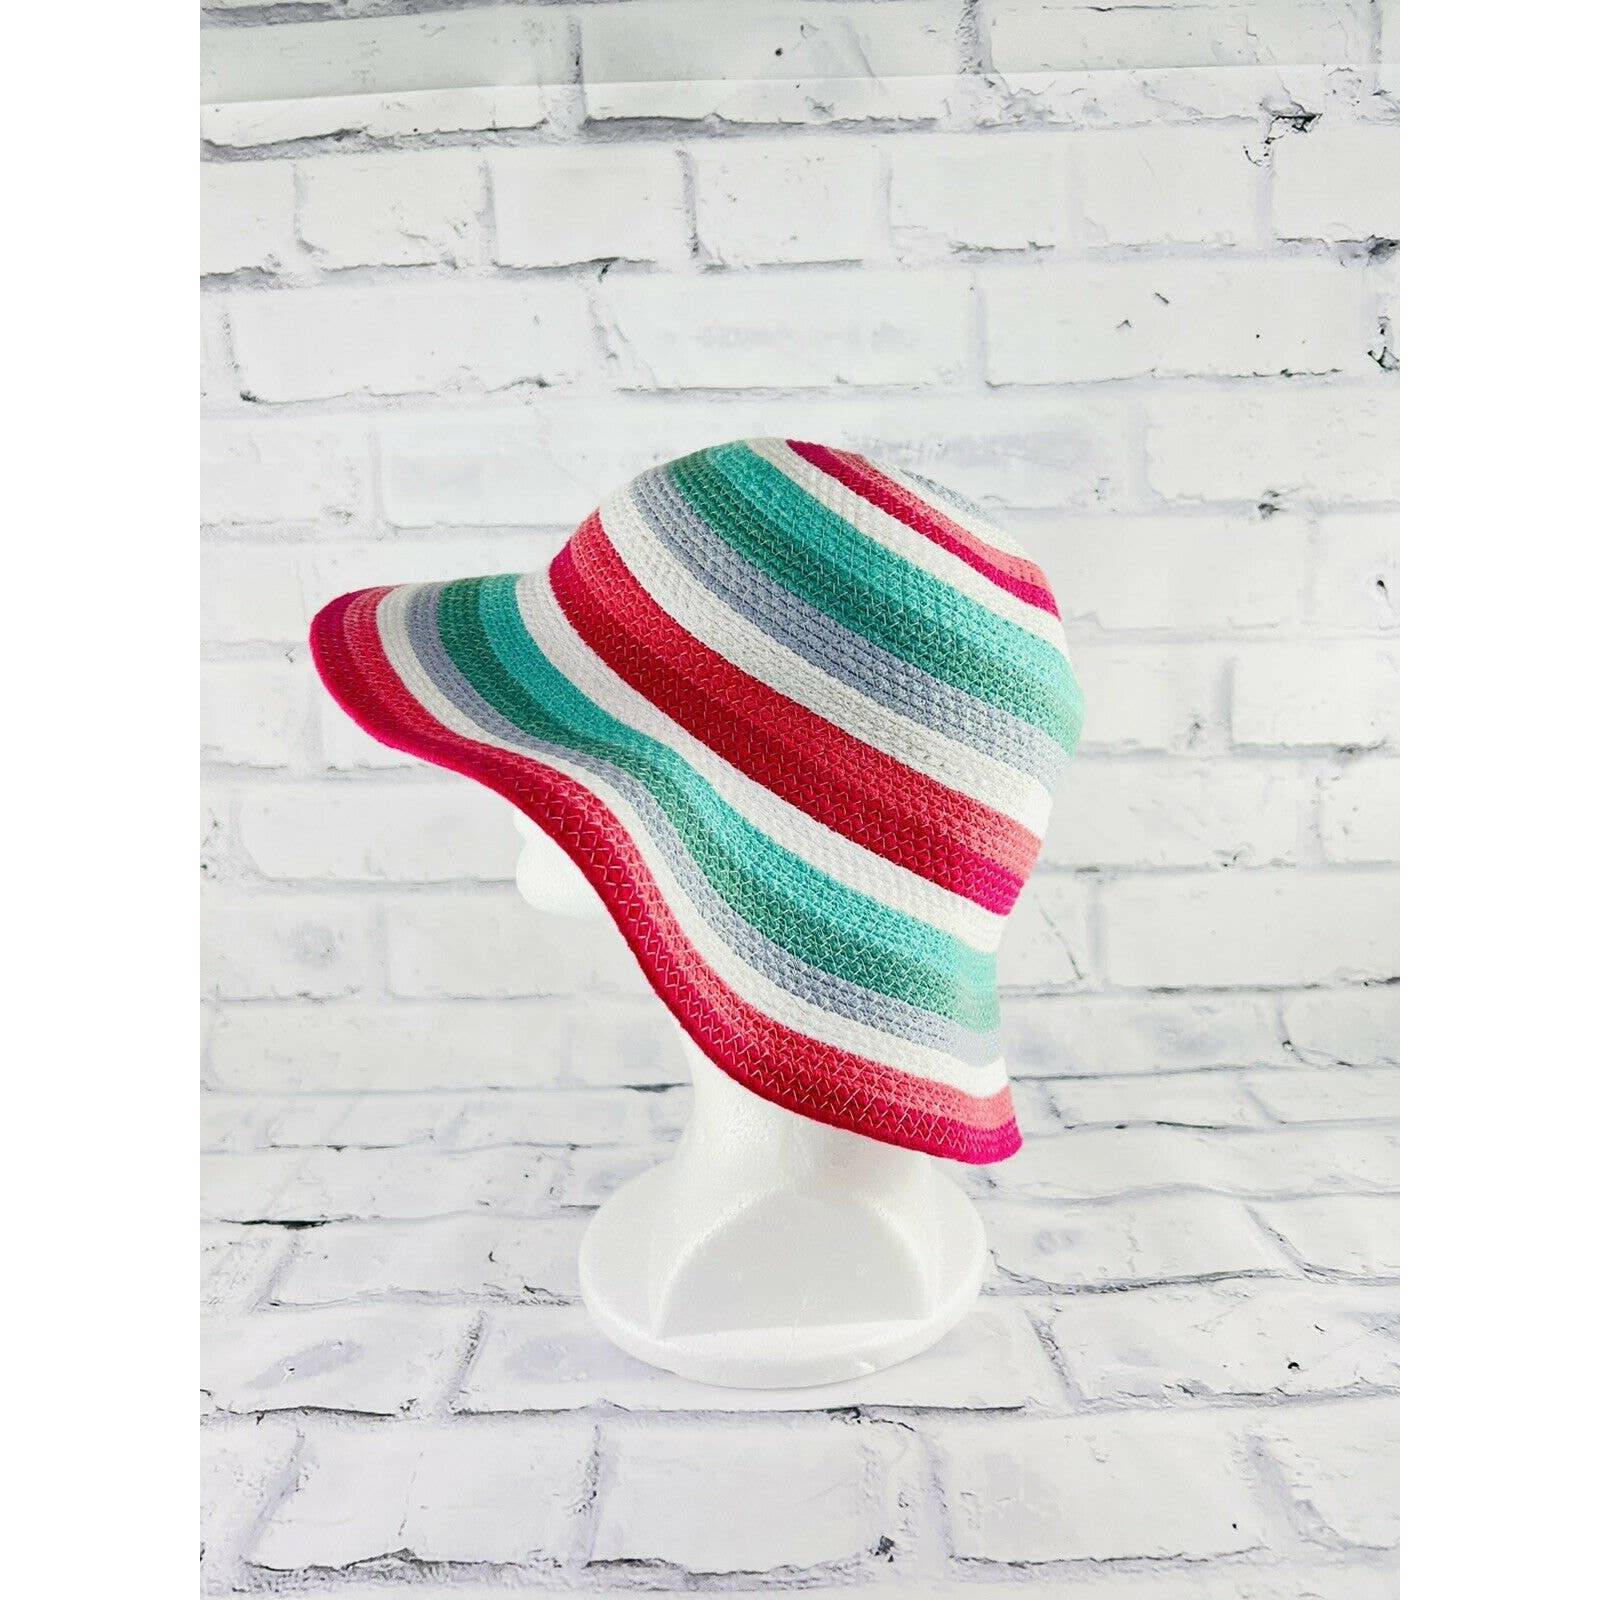 Jaclyn Smith Floppy Hat Women’s One Size Beach Summer Colorful Stripes Packable